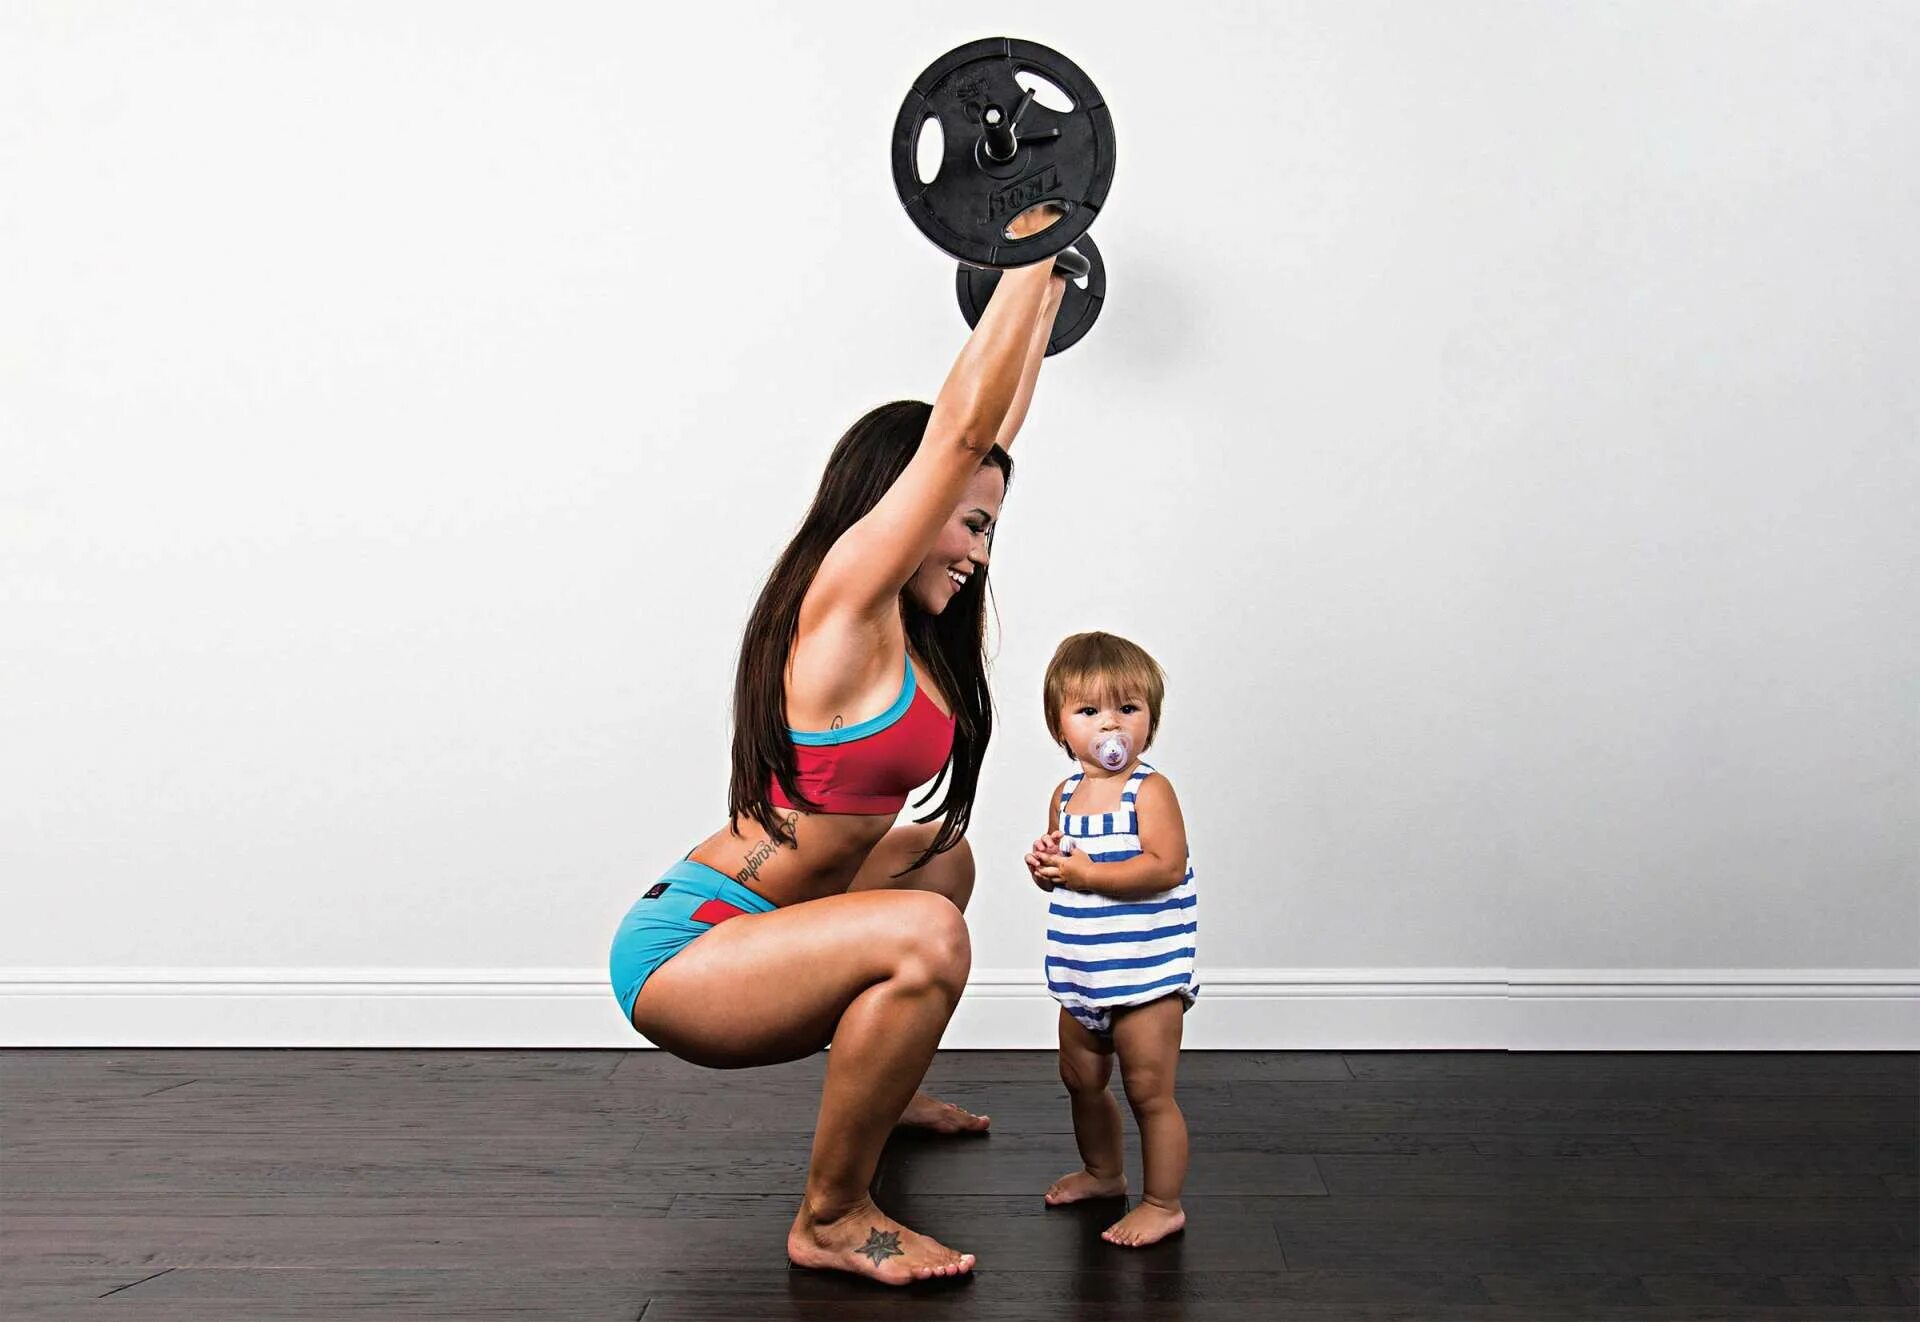 Мама фит. Fit Mommy. Fit mother with Baby selfie.